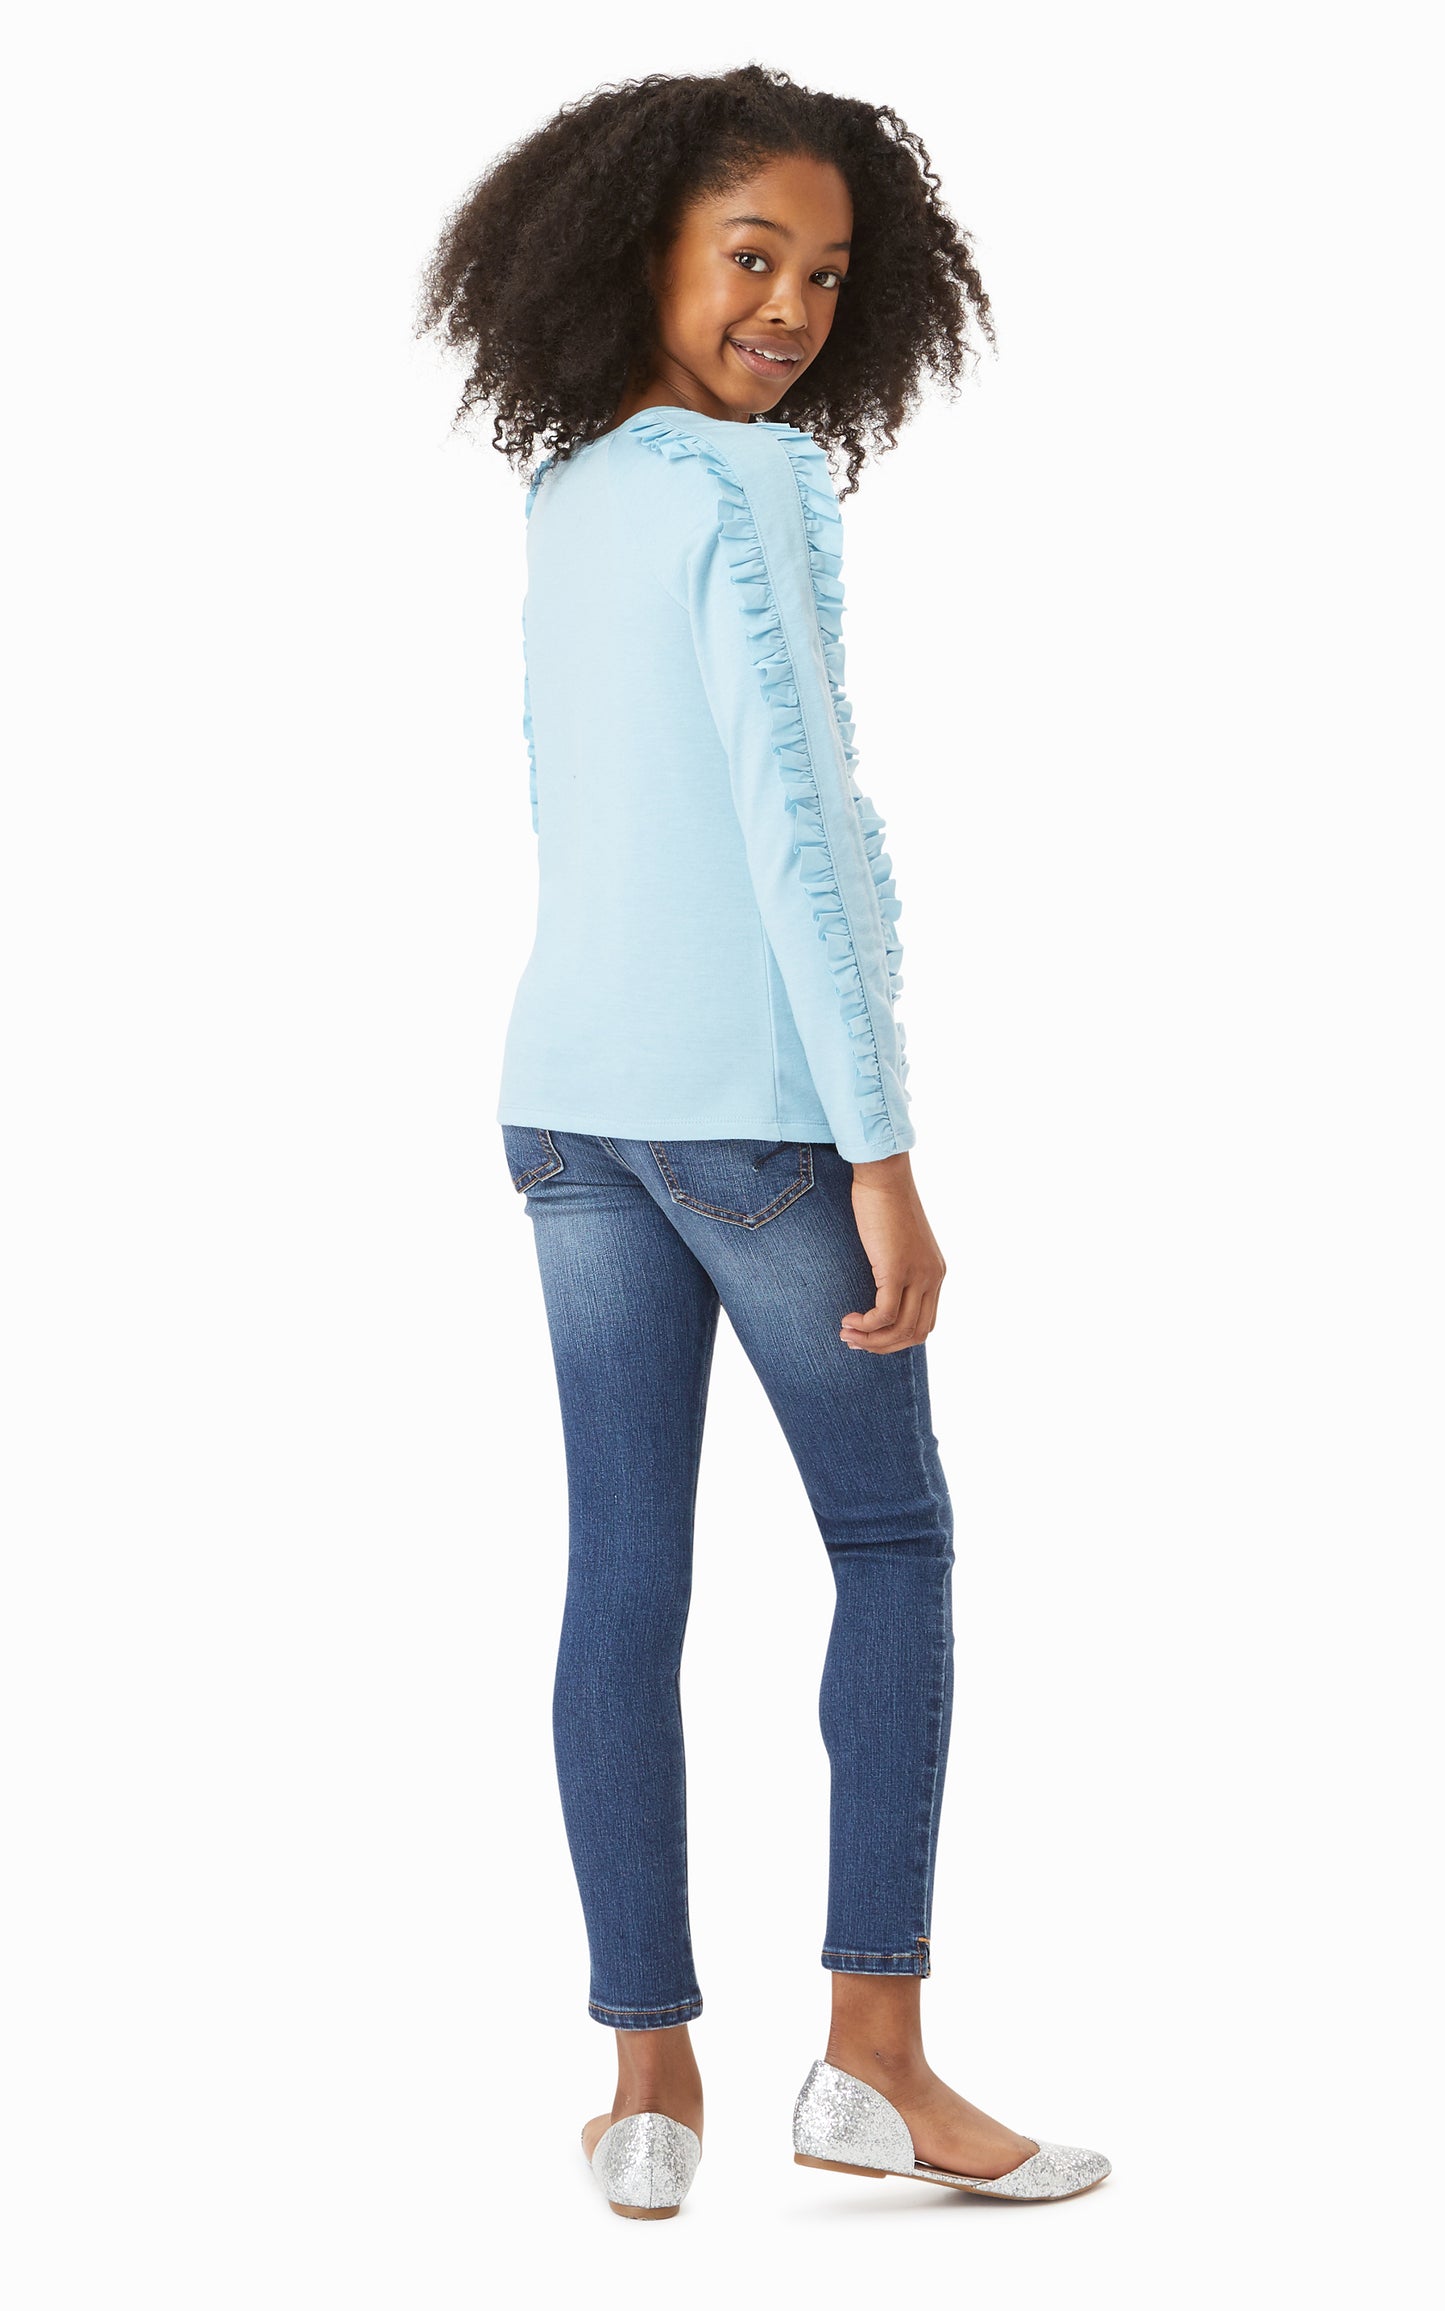 Back view of girl wearing blue long-sleeved top with ruffle trim down arms with ripped denim jeans. 